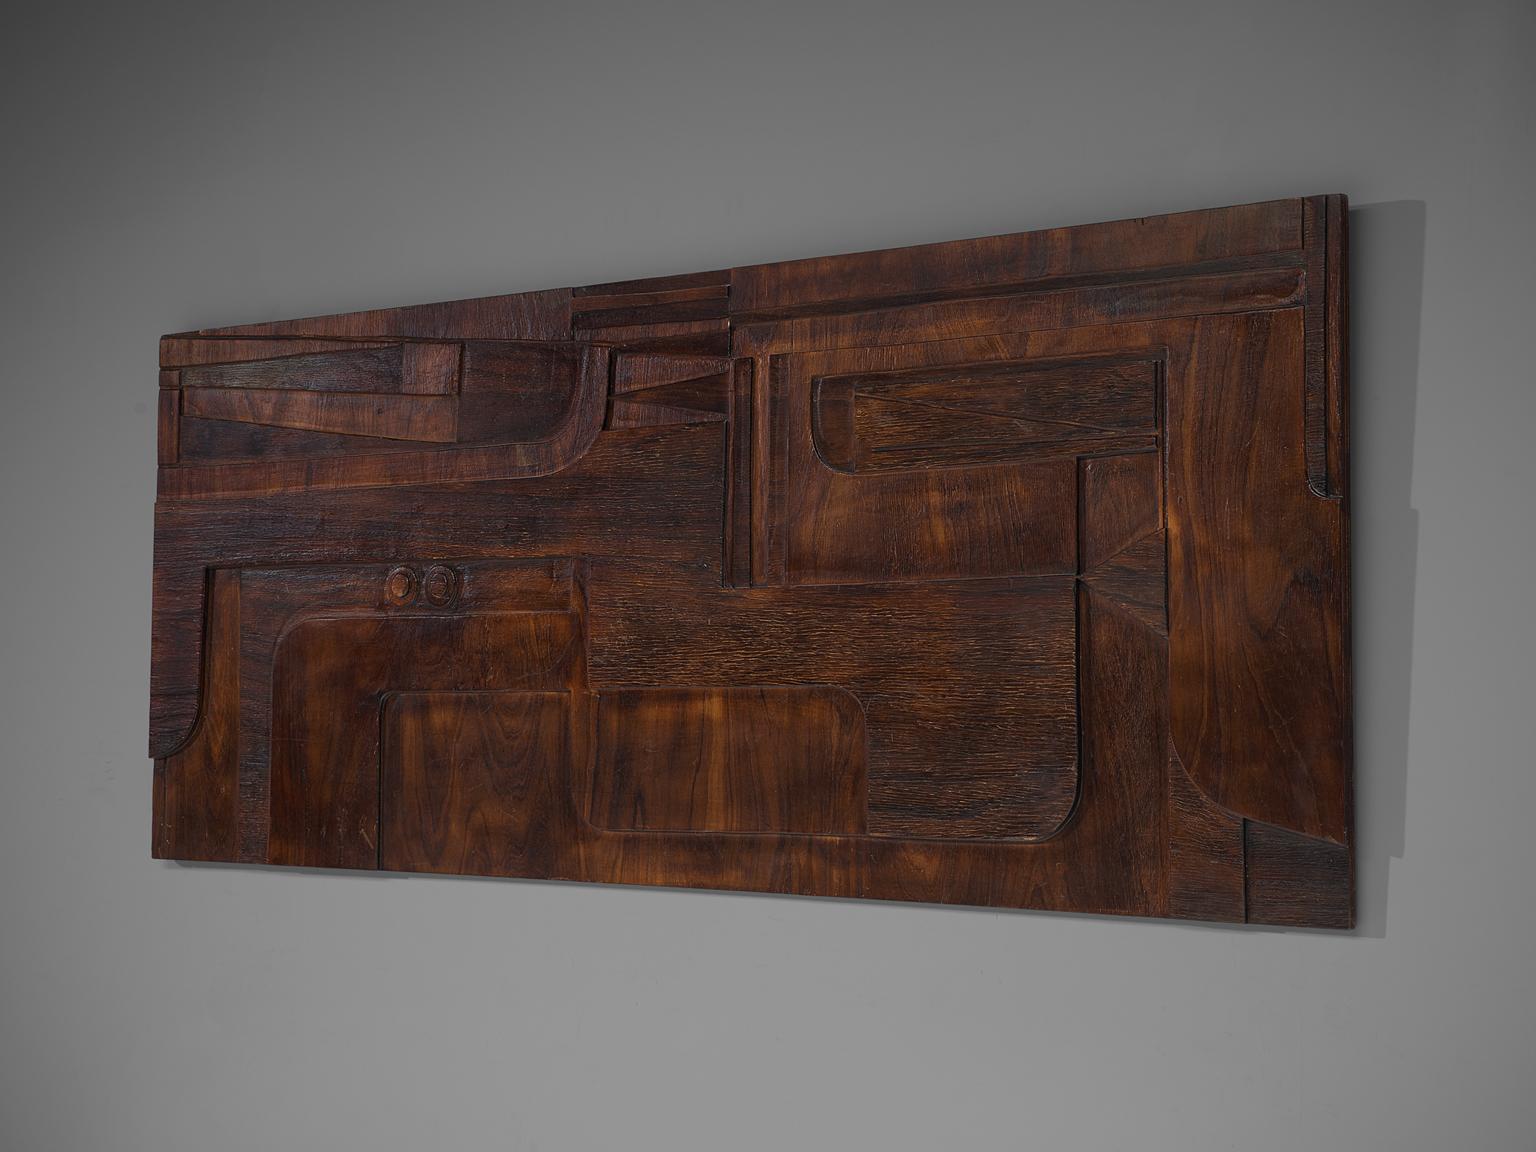 Nerone and Patuzzi for Gruppo NP2, sculptural wall-mounted art work, wood, Italy, 1970s.

This rare wooden sculptural wall panel is designed by Nerone and Patuzzi for Gruppo NP2. A Abstract Constructivism piece that is composed of carved wooden